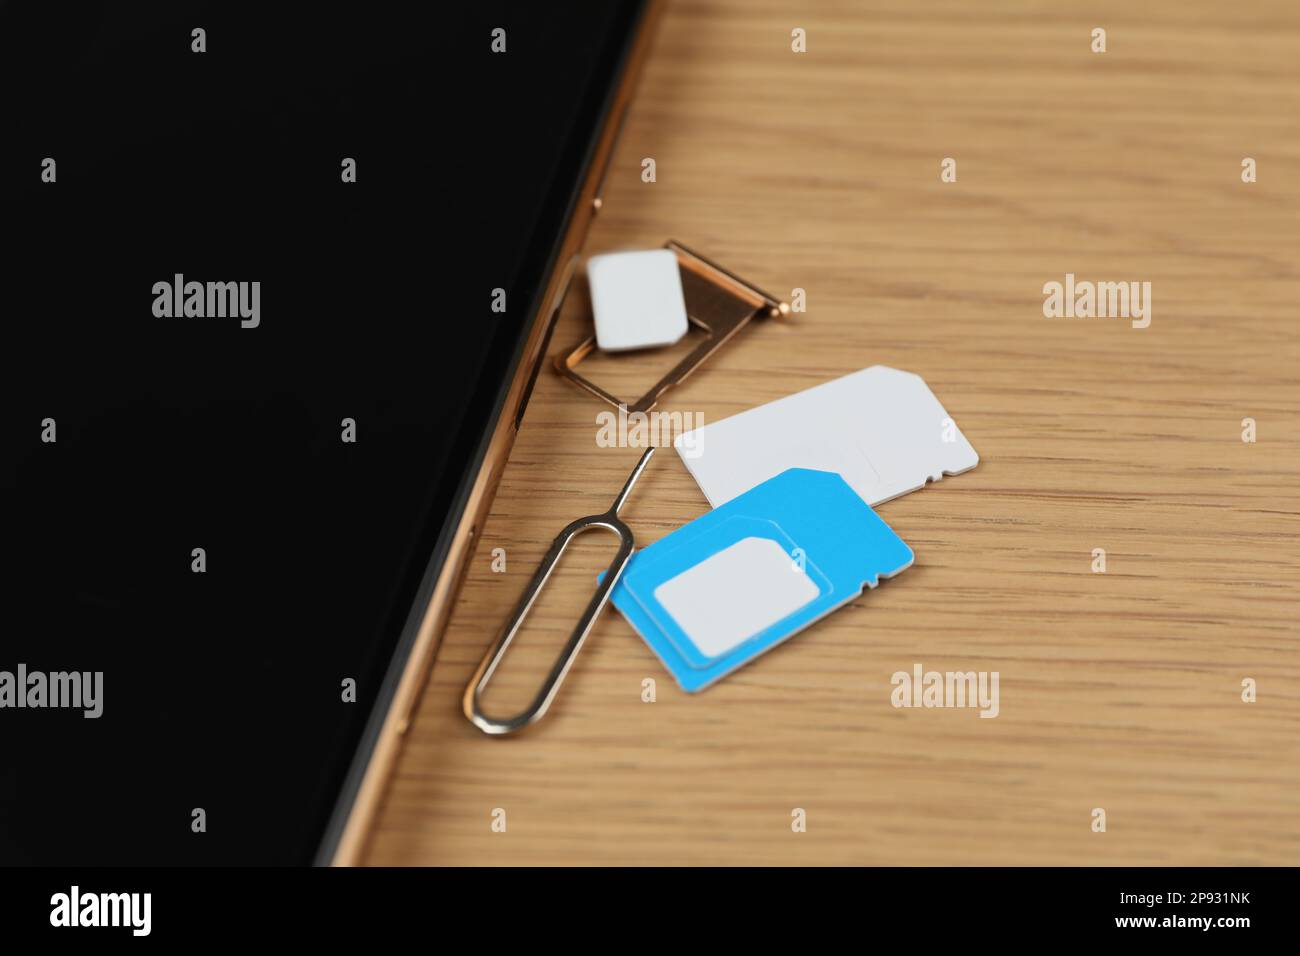 SIM cards, mobile phone and ejector tool on wooden table, closeup Stock Photo